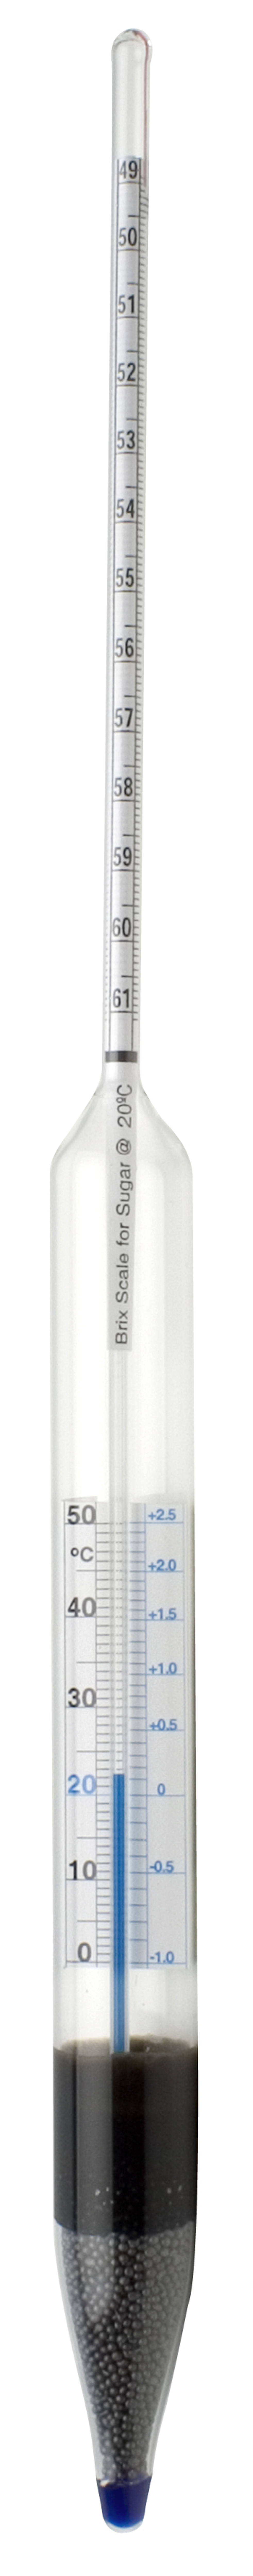 H-B DURAC Safety Brix Sugar Scale Combined Form Thermo-Hydrometers; Traceable to NIST